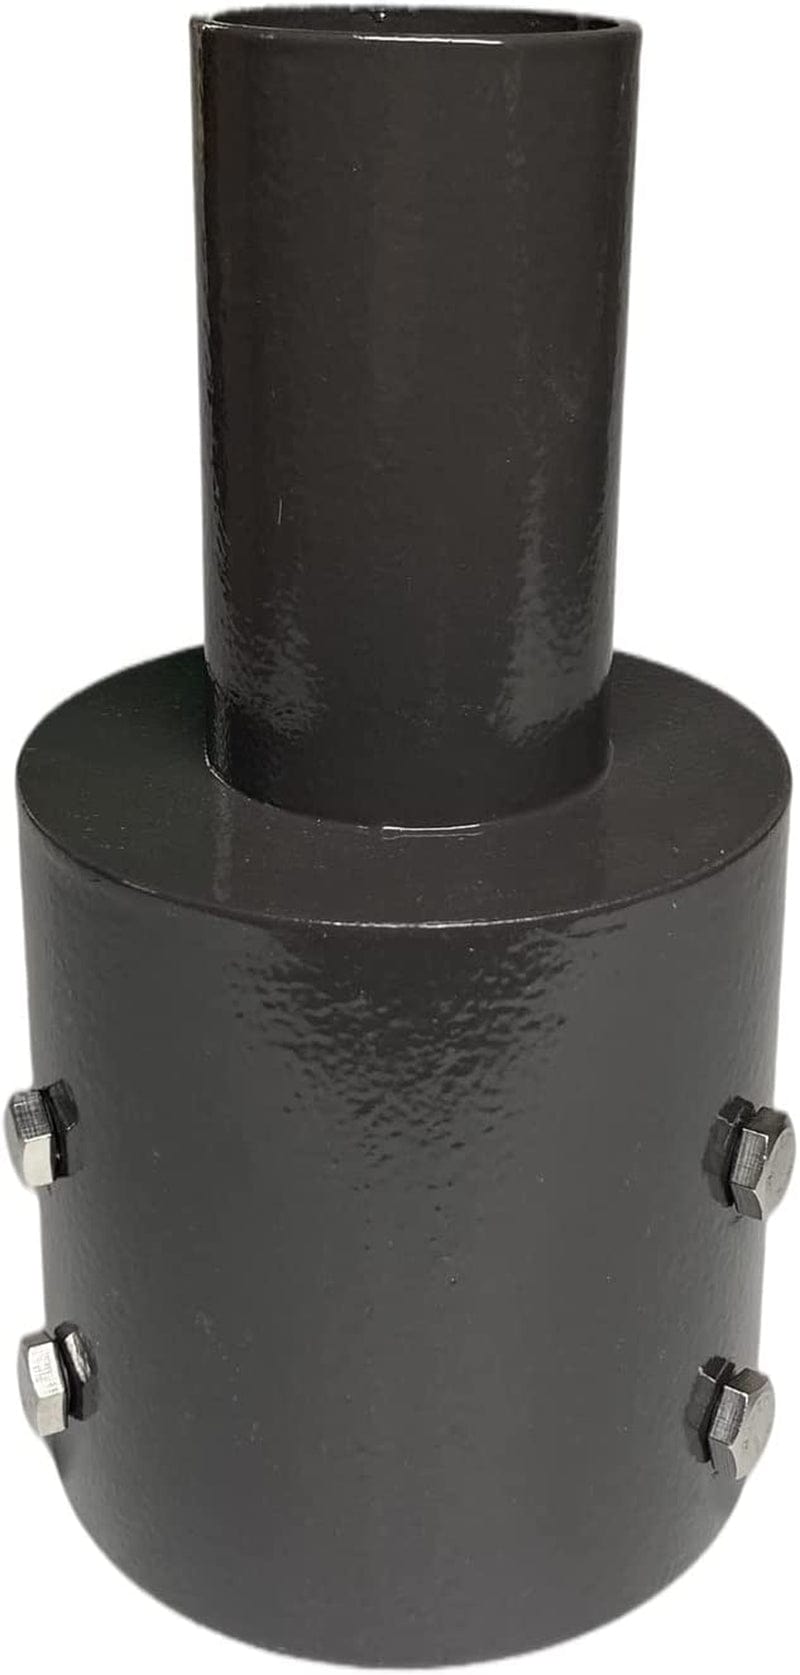 Tenon Adapter with 3 Horizontal 90 Degree Arms,Fits over Any Pole with a Vertical 2 3/8" Tenon, 3 Horizontal 2-3/8 Inch Tenons,Post Top Mount for Shoebox,Area Light,Floodlights Home & Garden > Lighting > Flood & Spot Lights 2LED 4" Round Pole  